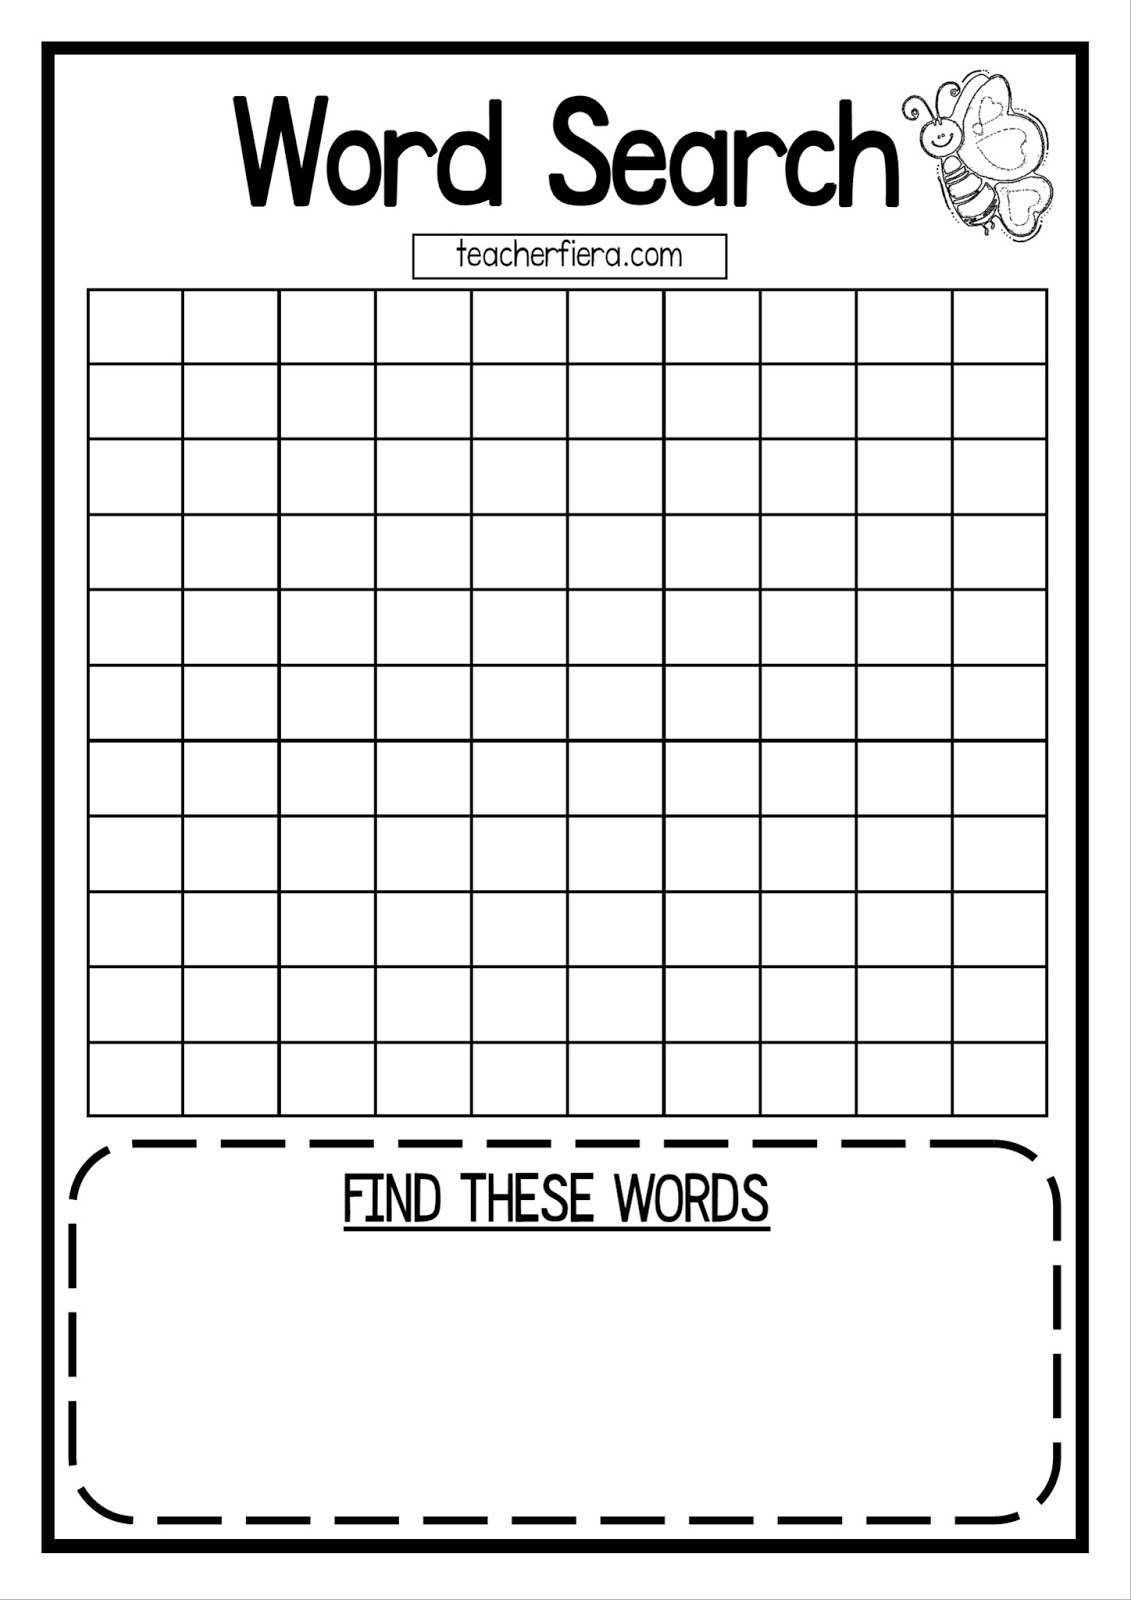 teacherfiera.com: WORD SEARCH TEMPLATES (COLOURED AND BLACK AND WHITE